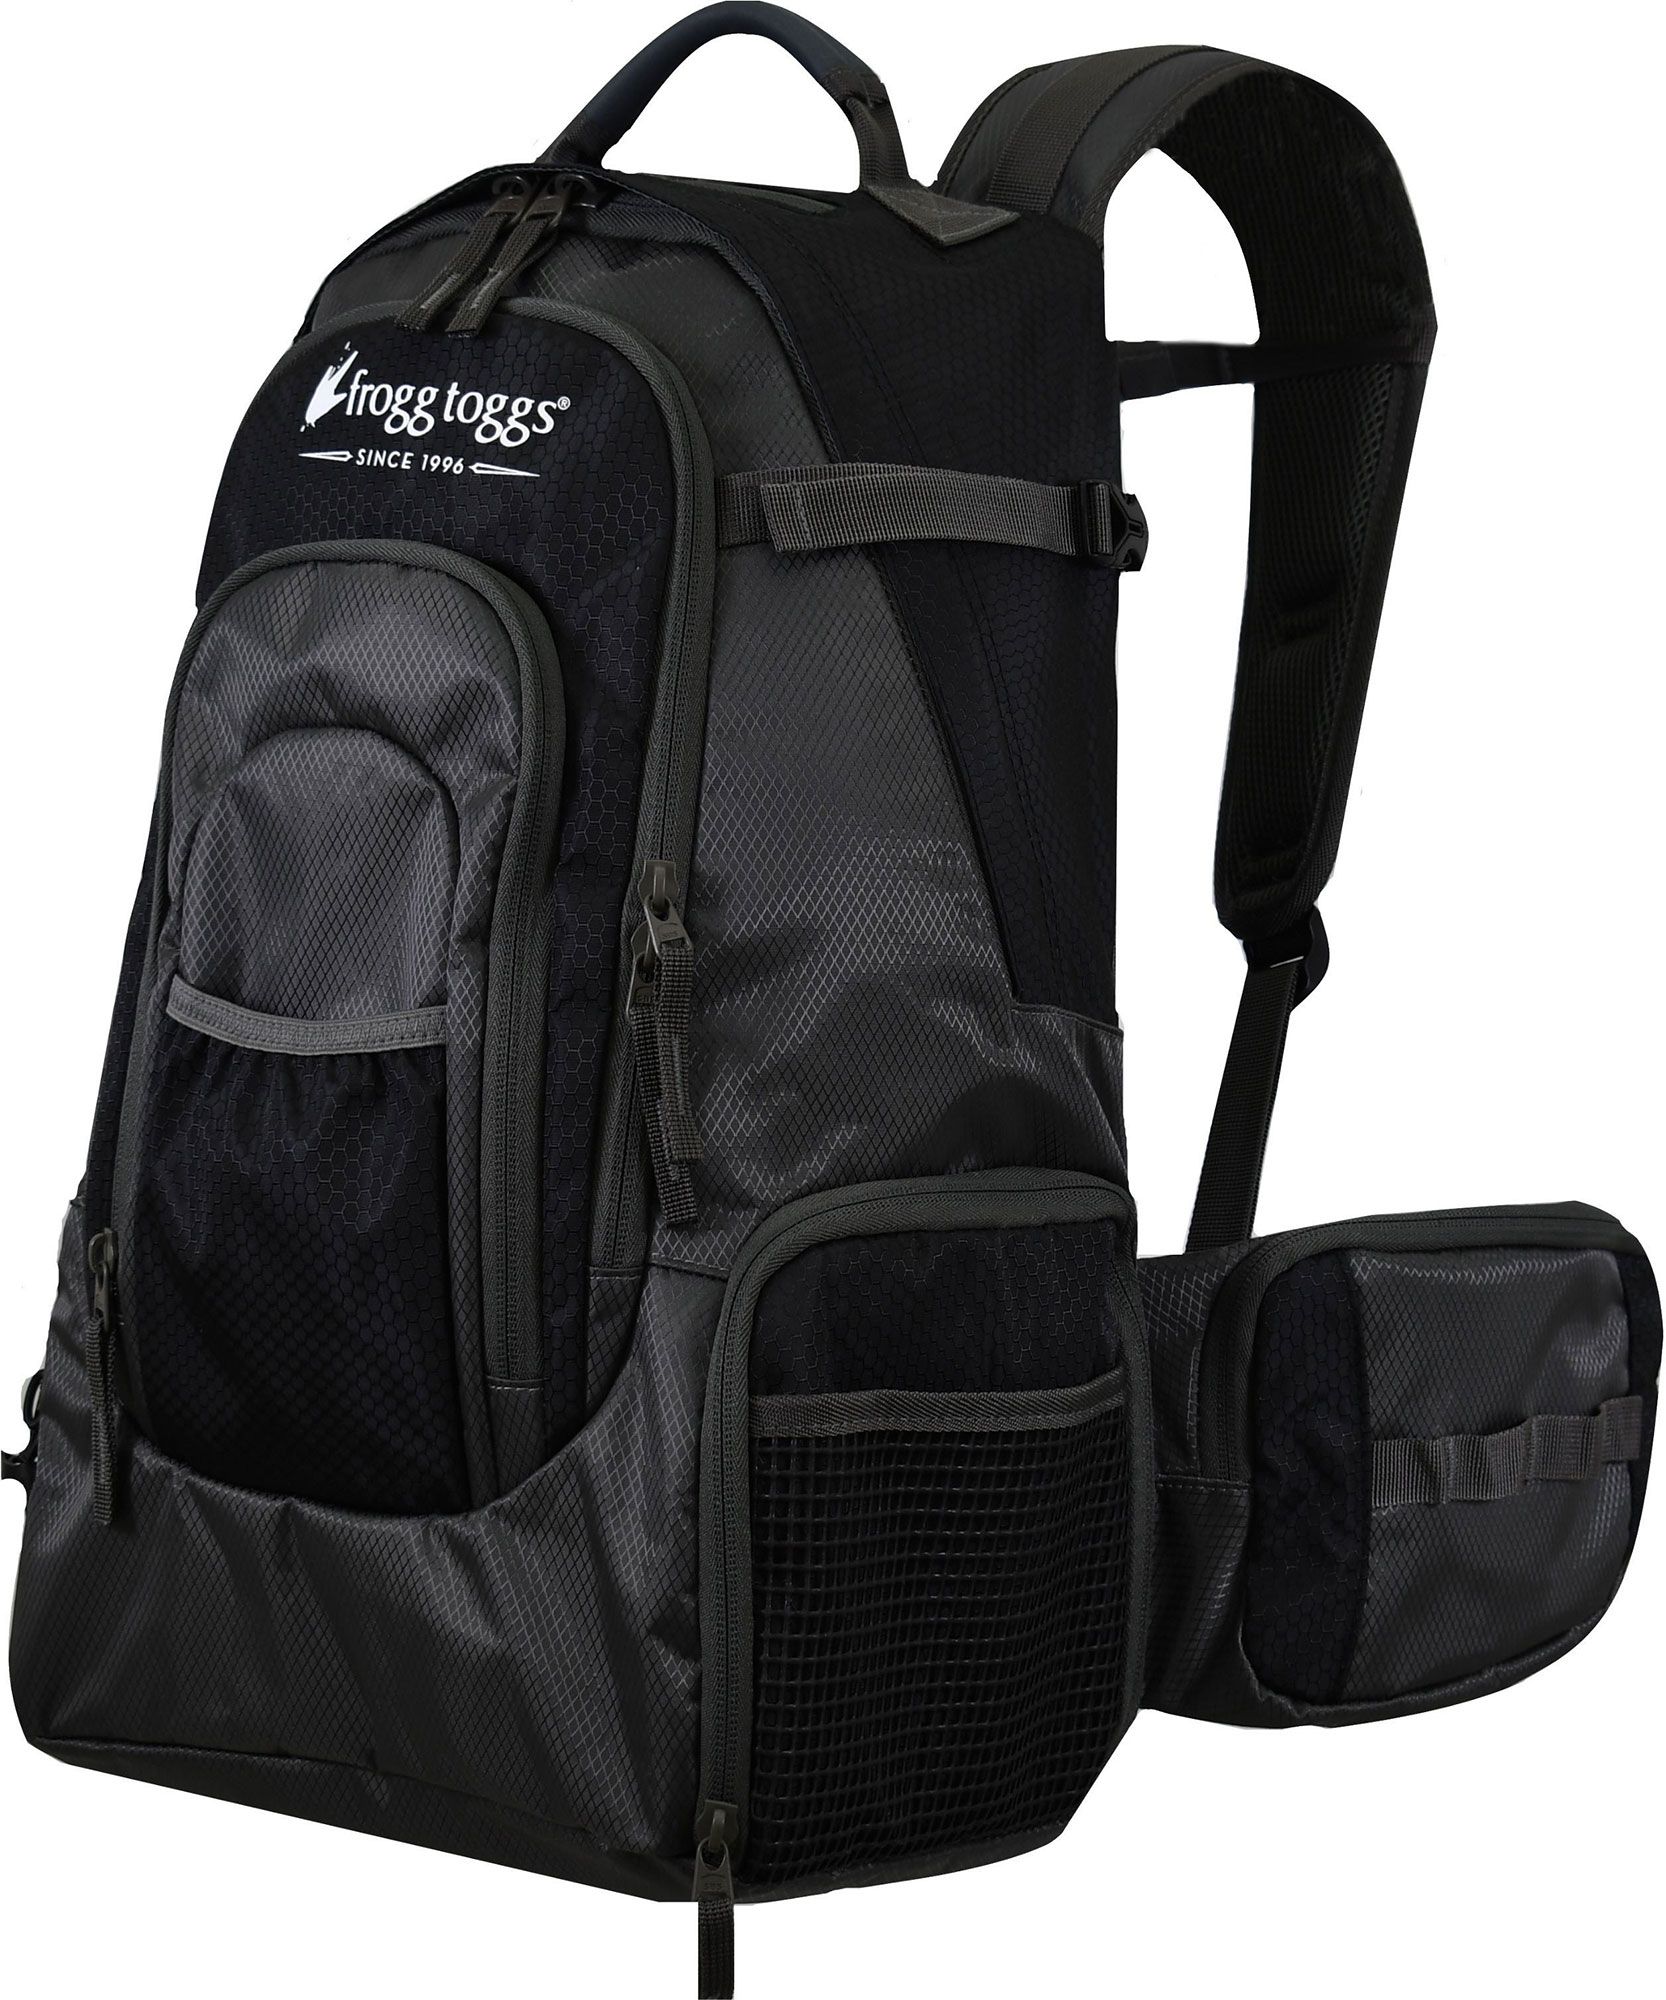 Frogg Toggs I3 Tackle Backpack, 43% OFF